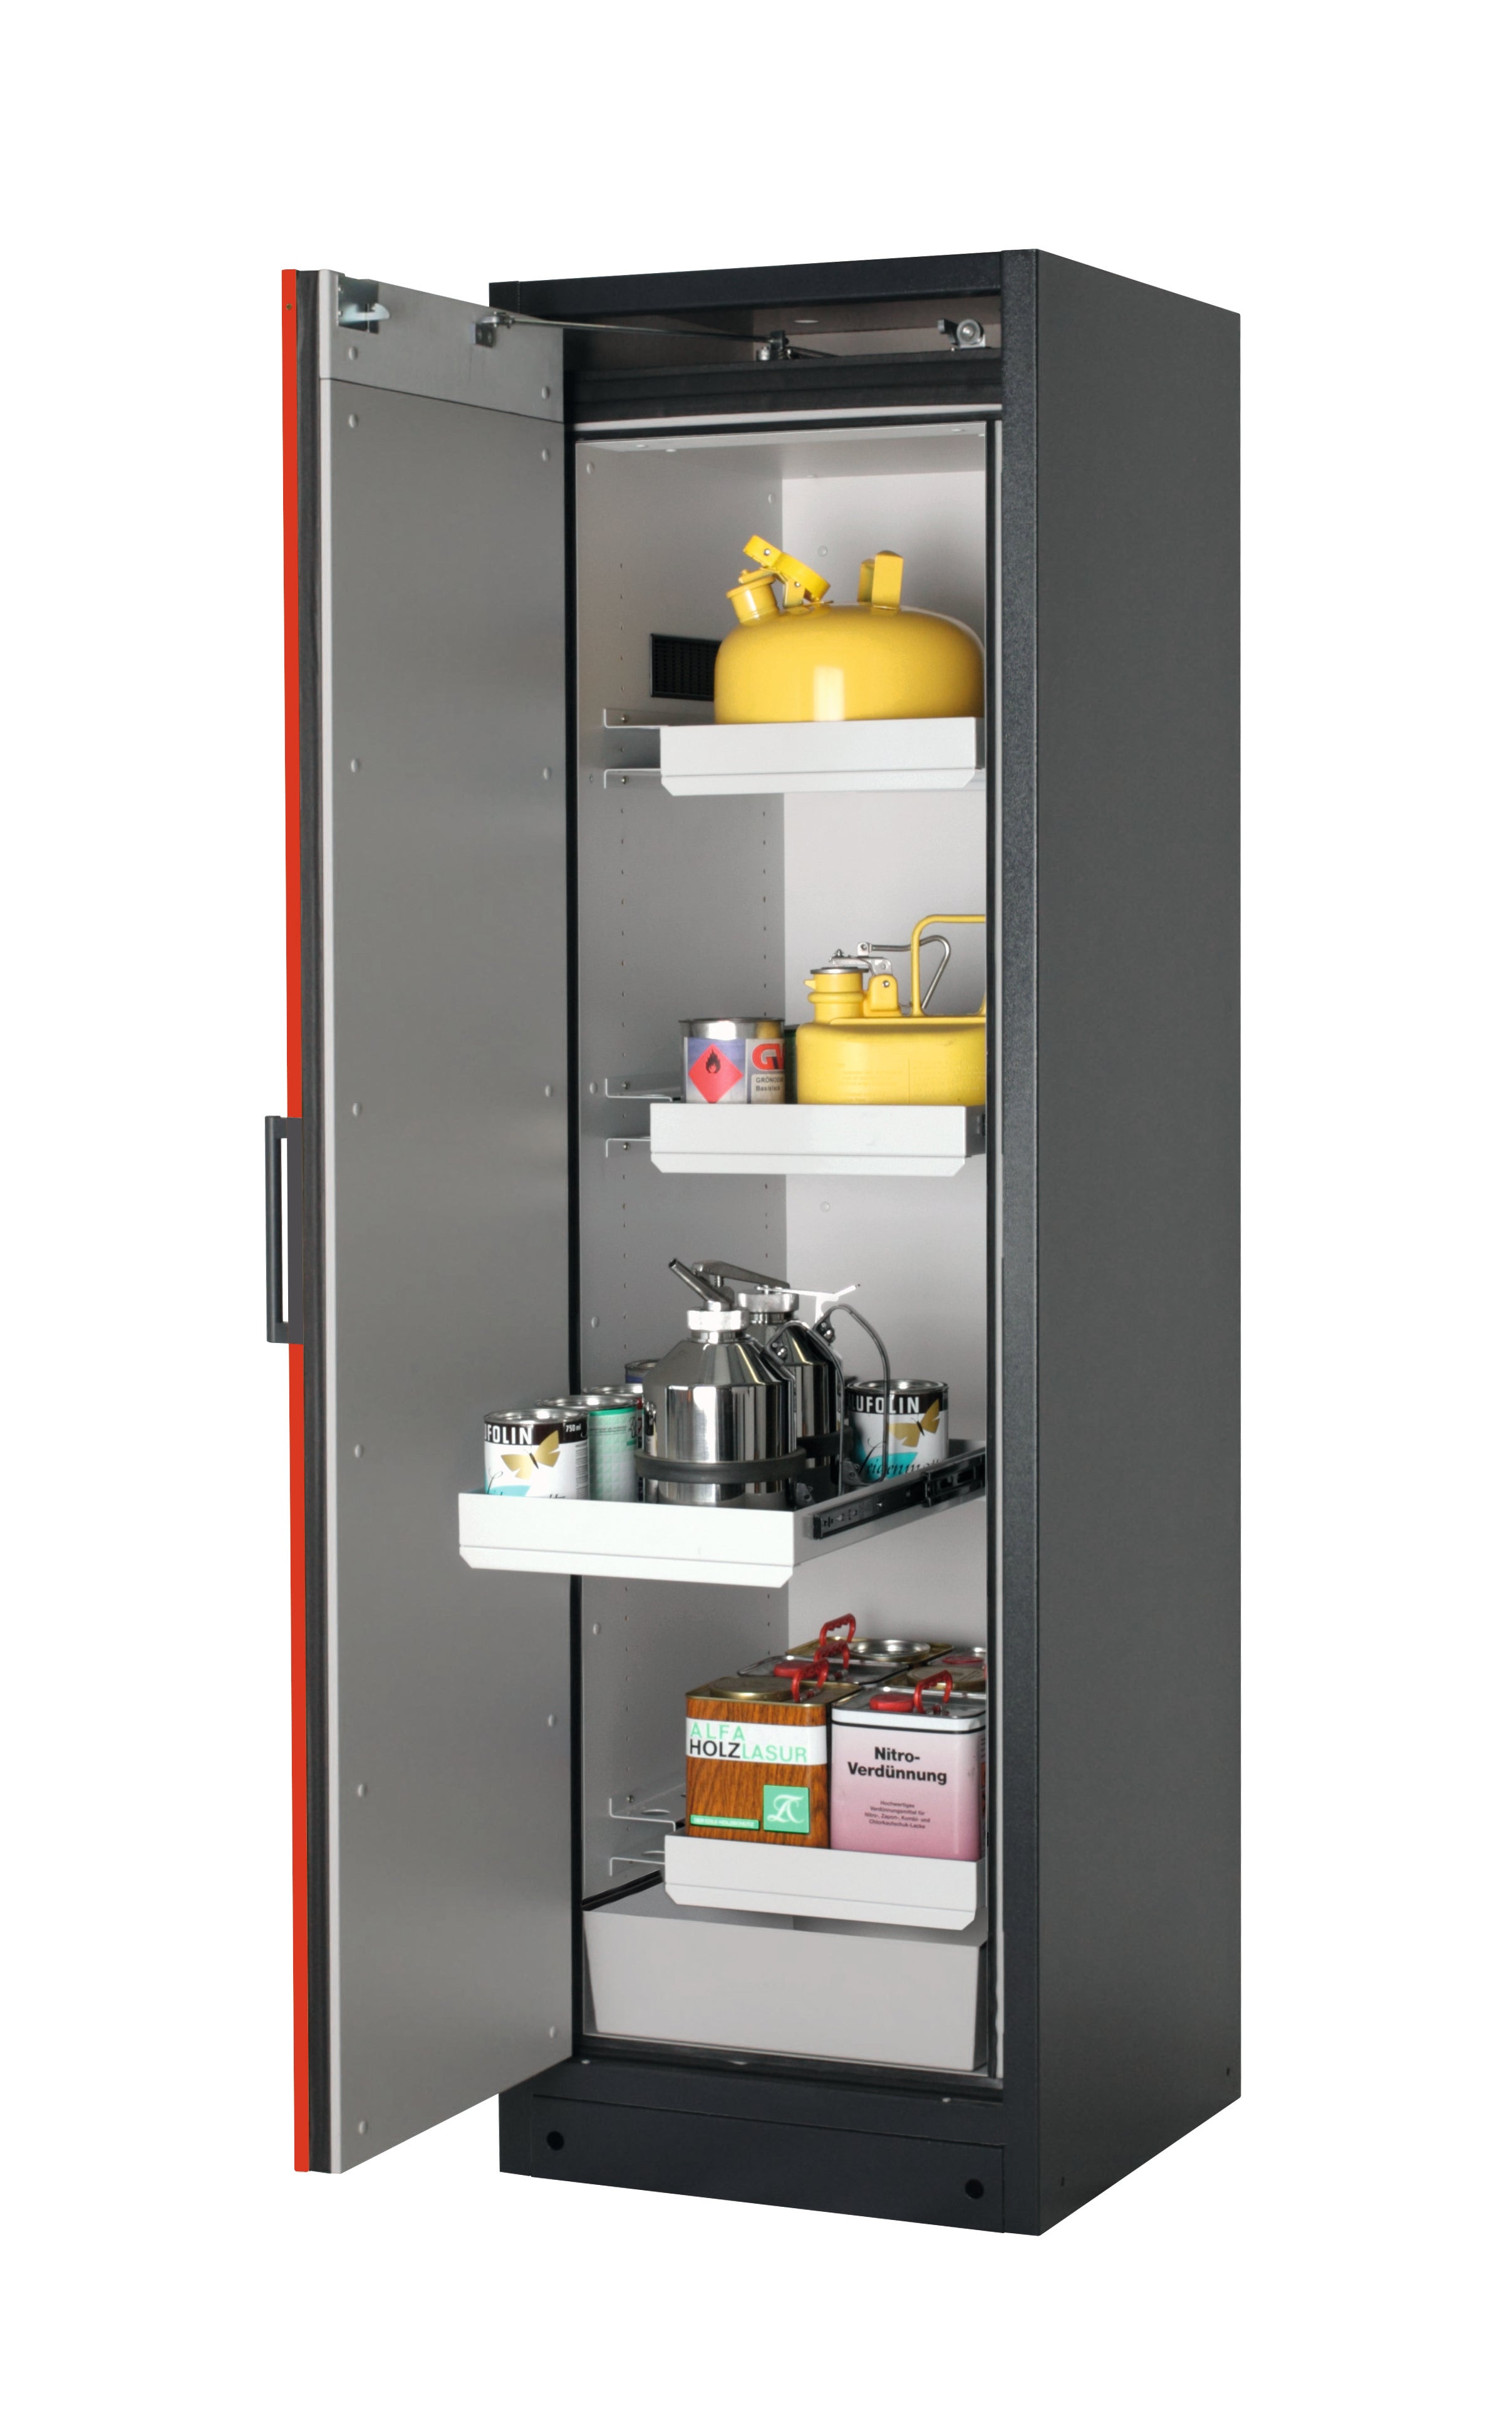 Type 90 safety storage cabinet Q-CLASSIC-90 model Q90.195.060 in traffic red RAL 3020 with 3x drawer (standard) (sheet steel),